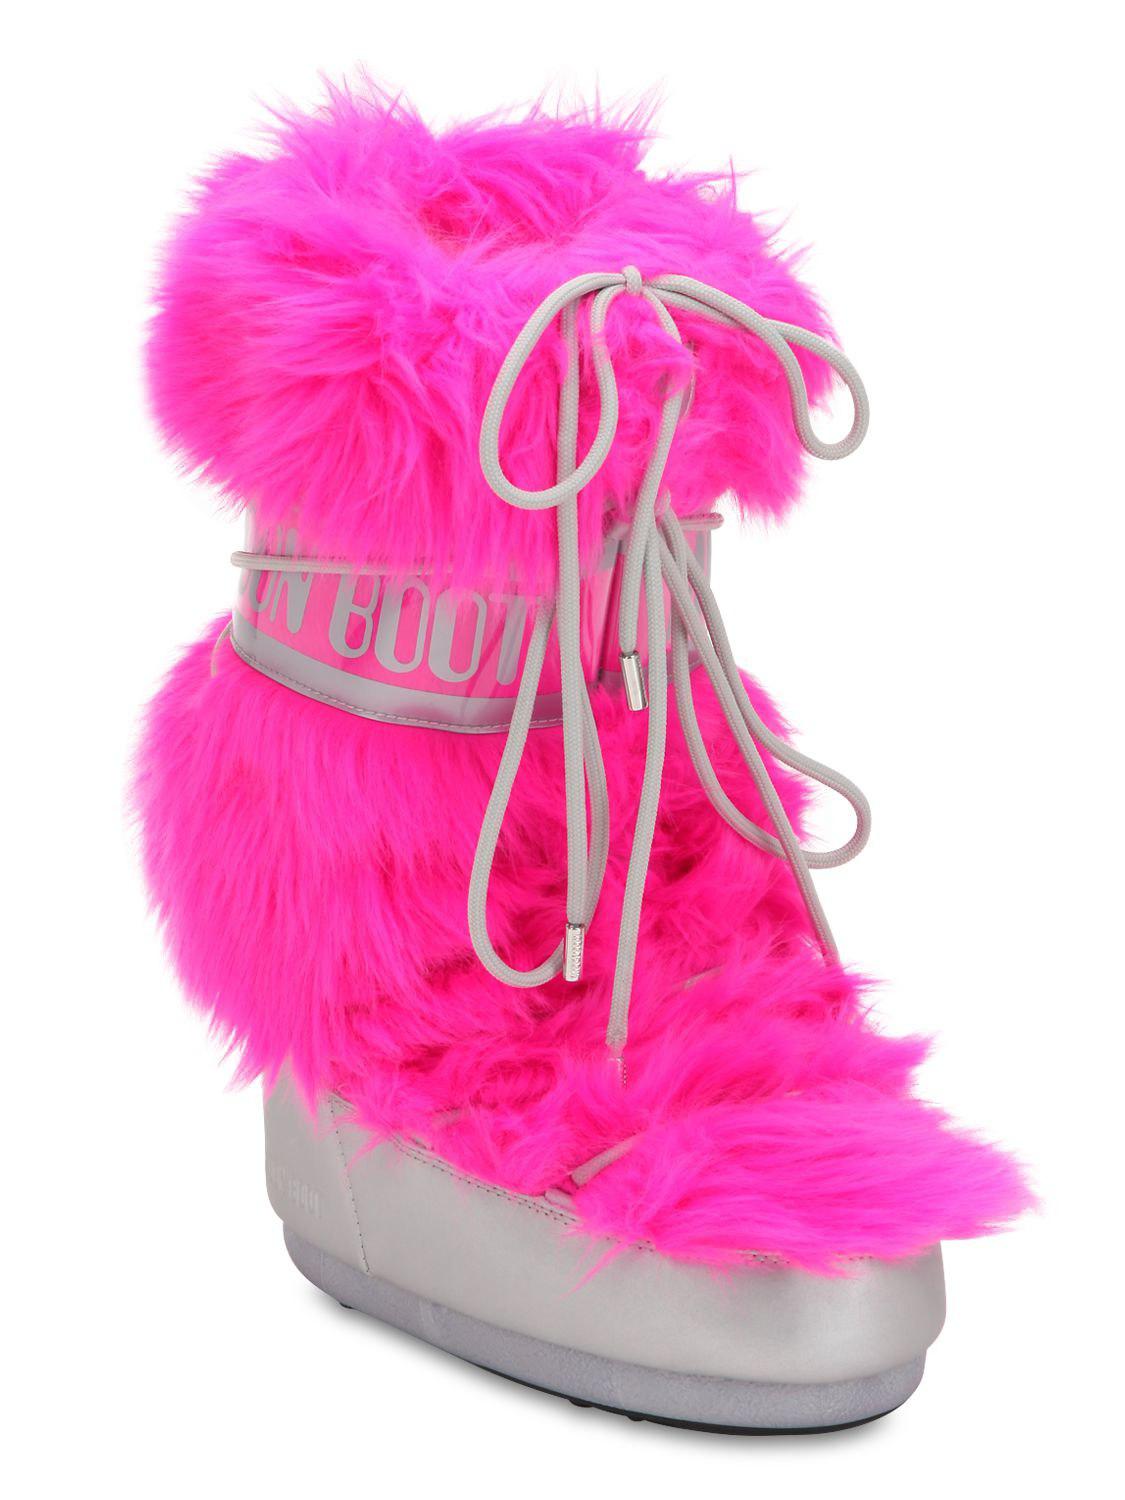 Moon Boot Long Faux Fur Snow Boots in Pink | Lyst